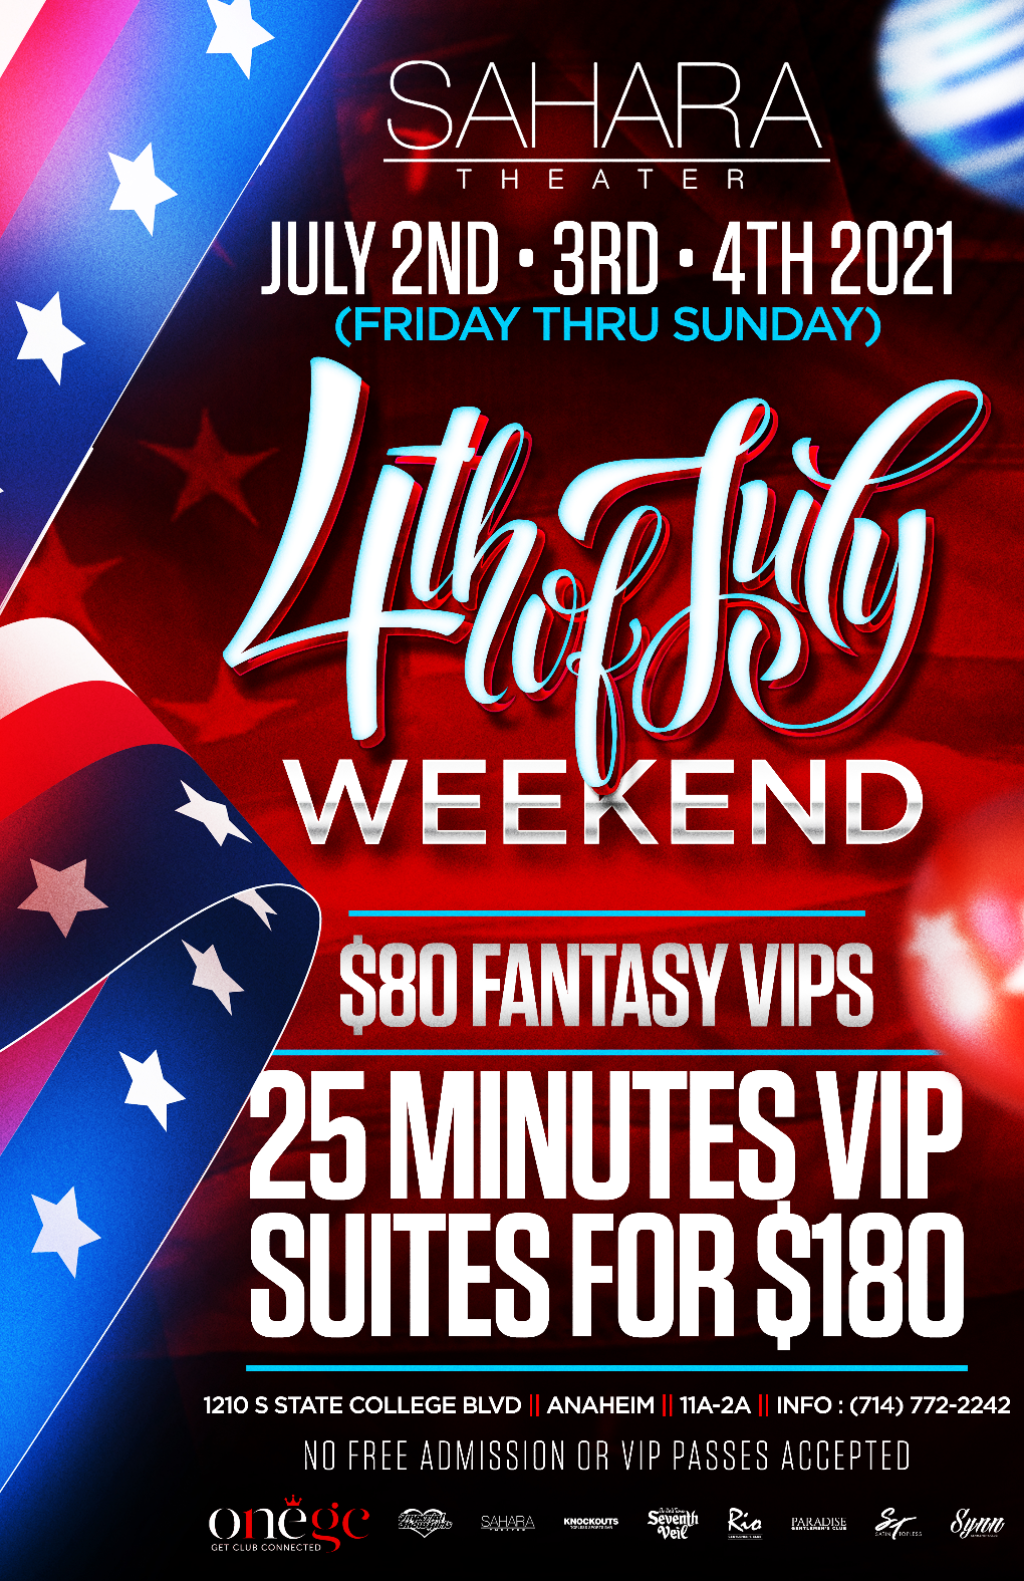 JULY 4TH WEEKEND SPECIAL